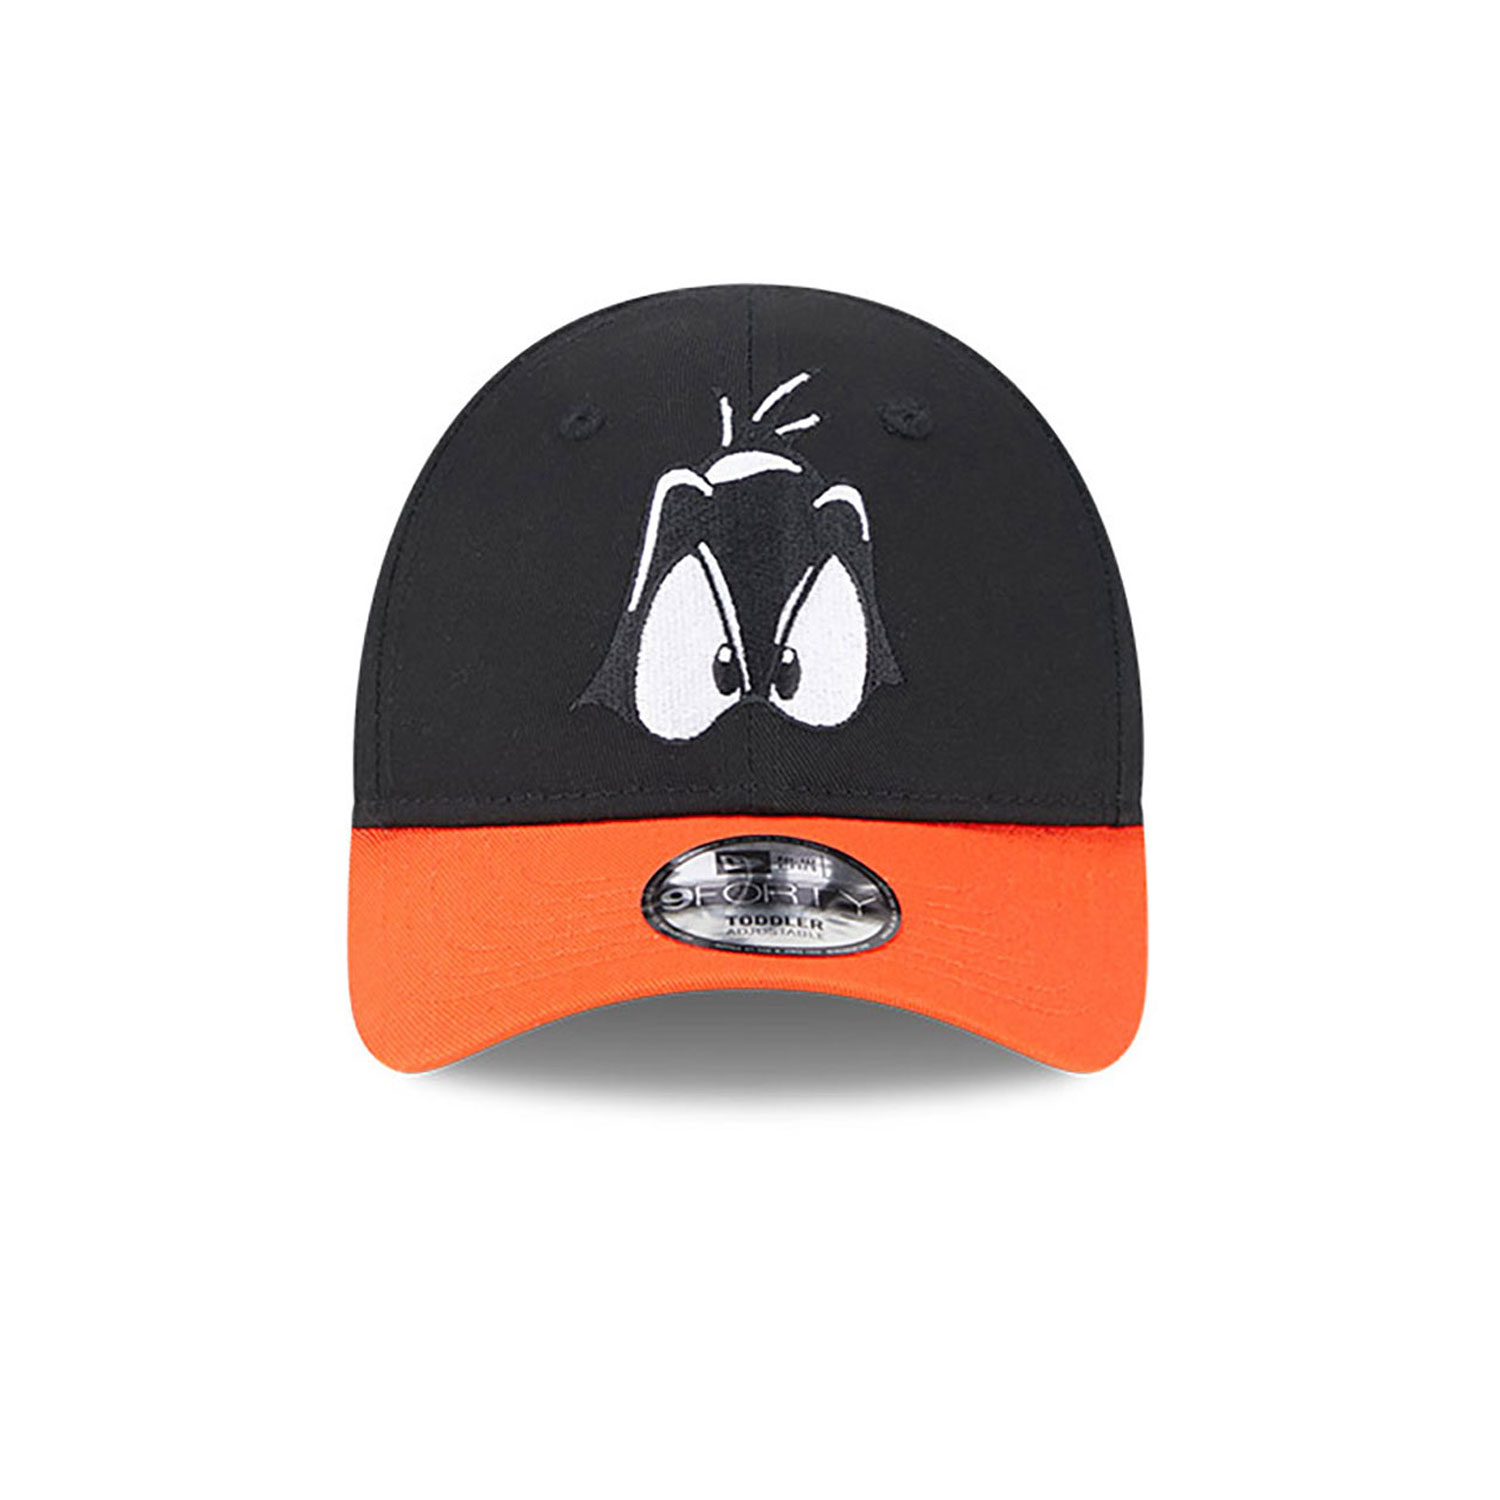 Daffy Duck Looney Tunes Toddler Black 9FORTY Adjustable Cap